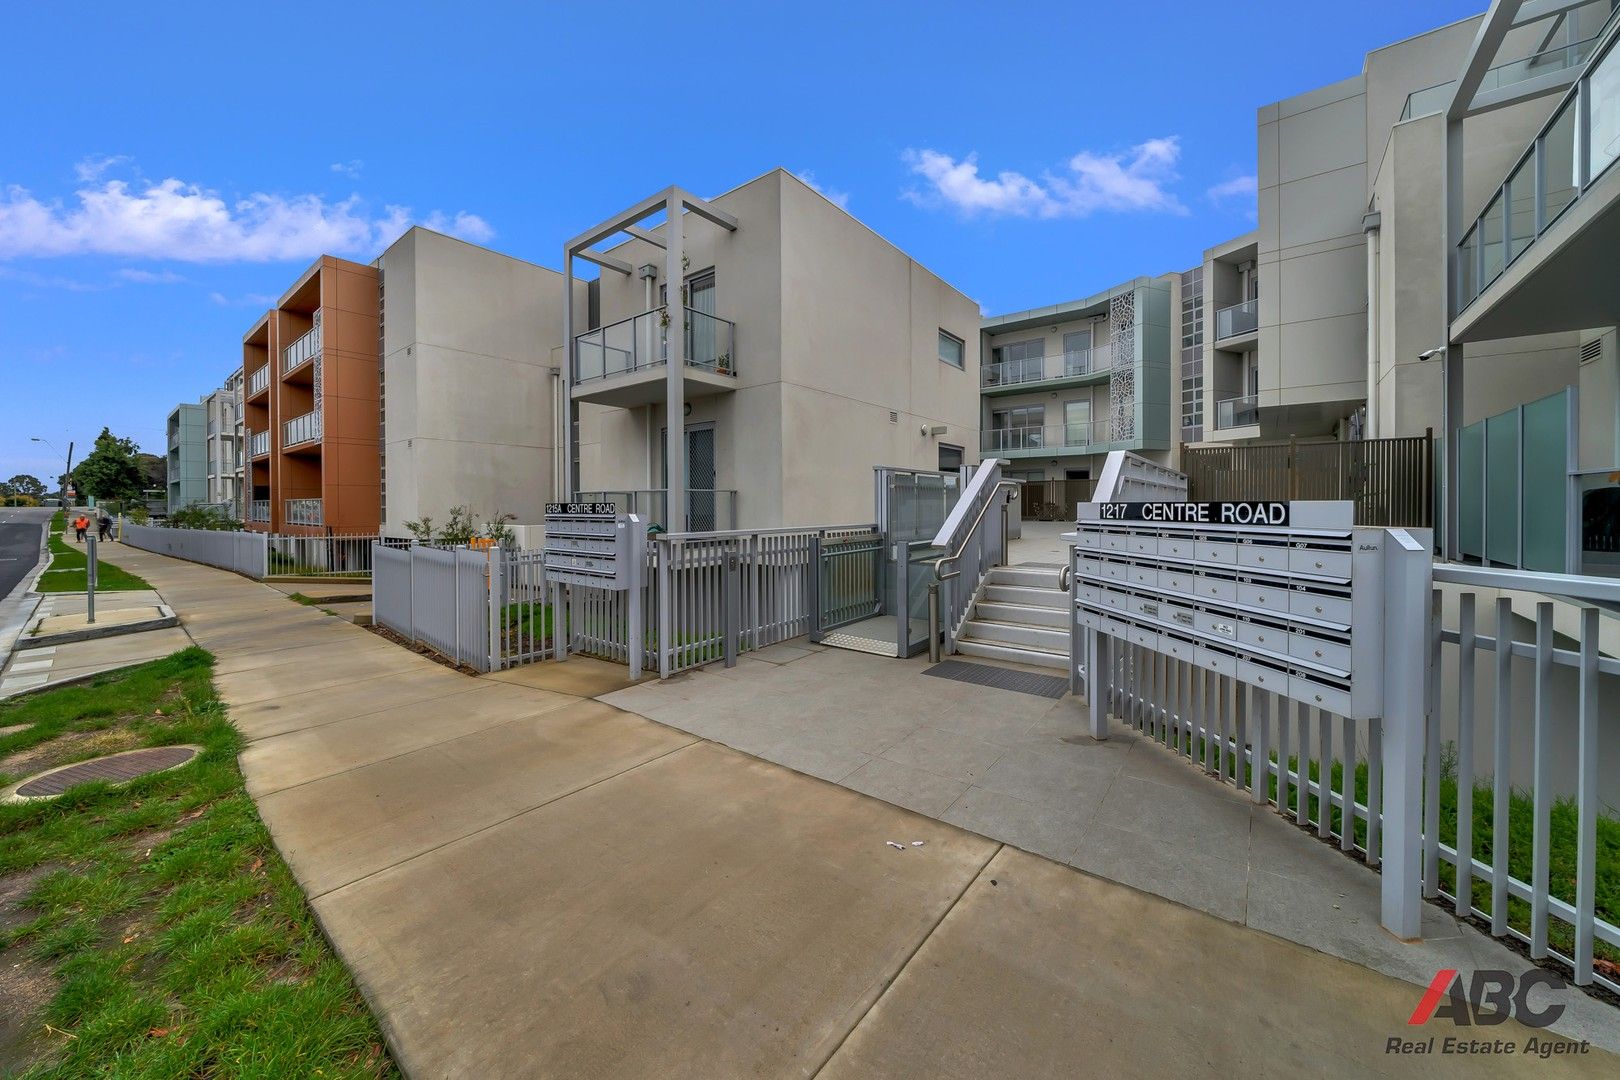 2 bedrooms Apartment / Unit / Flat in G07/1217 Centre Road OAKLEIGH SOUTH VIC, 3167